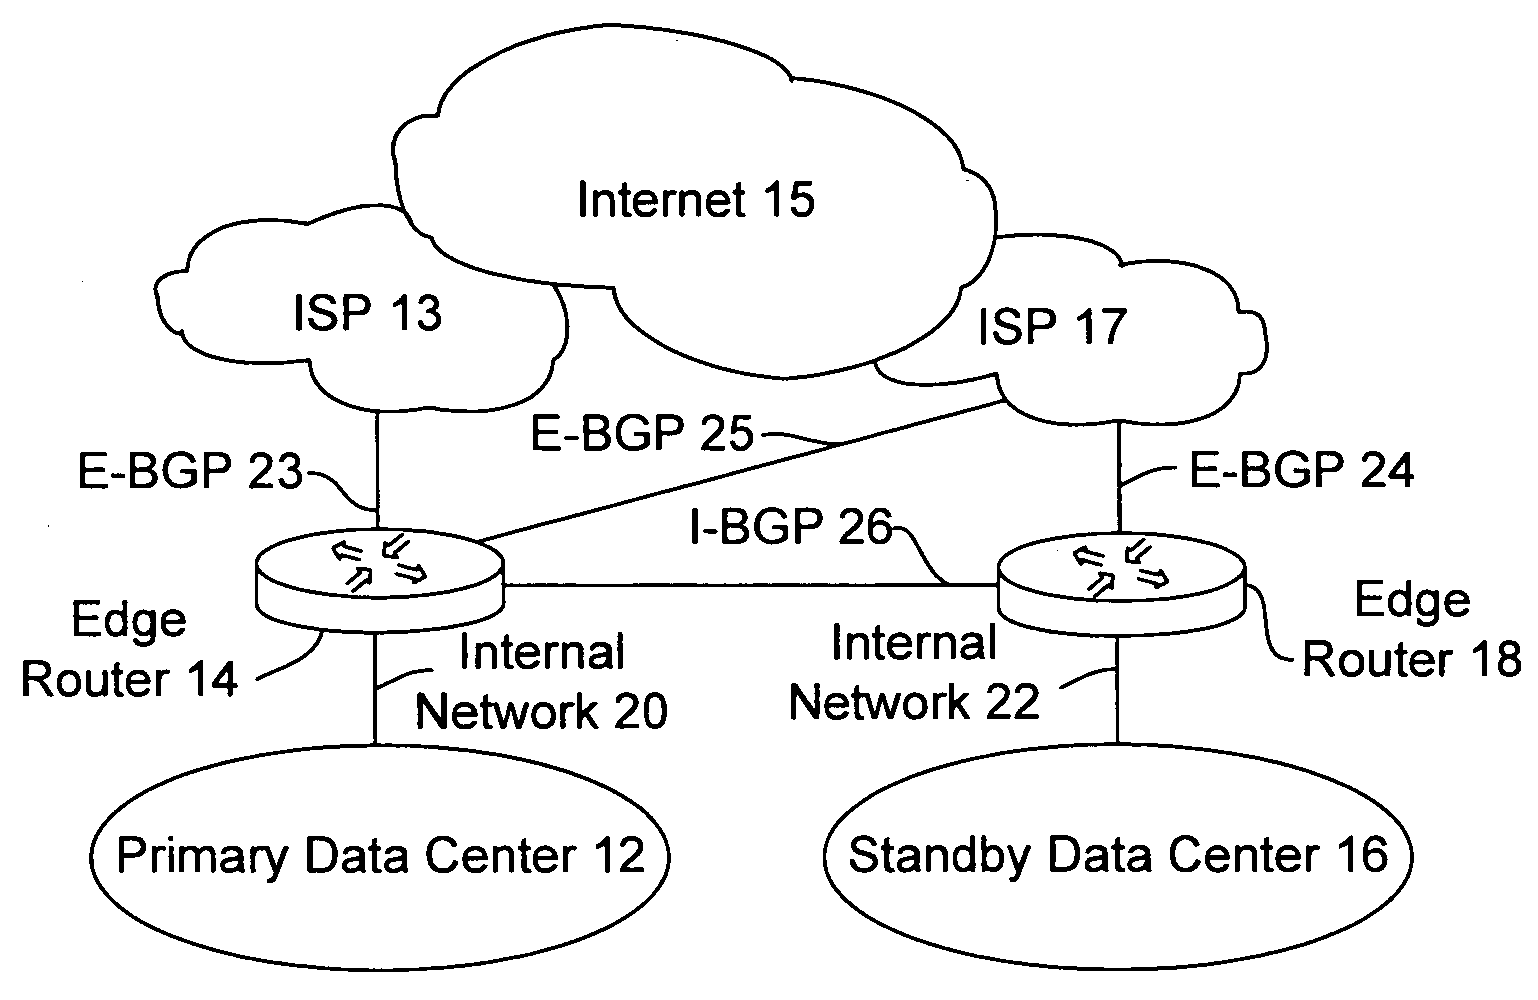 Disaster recovery for active-standby data center using route health and BGP